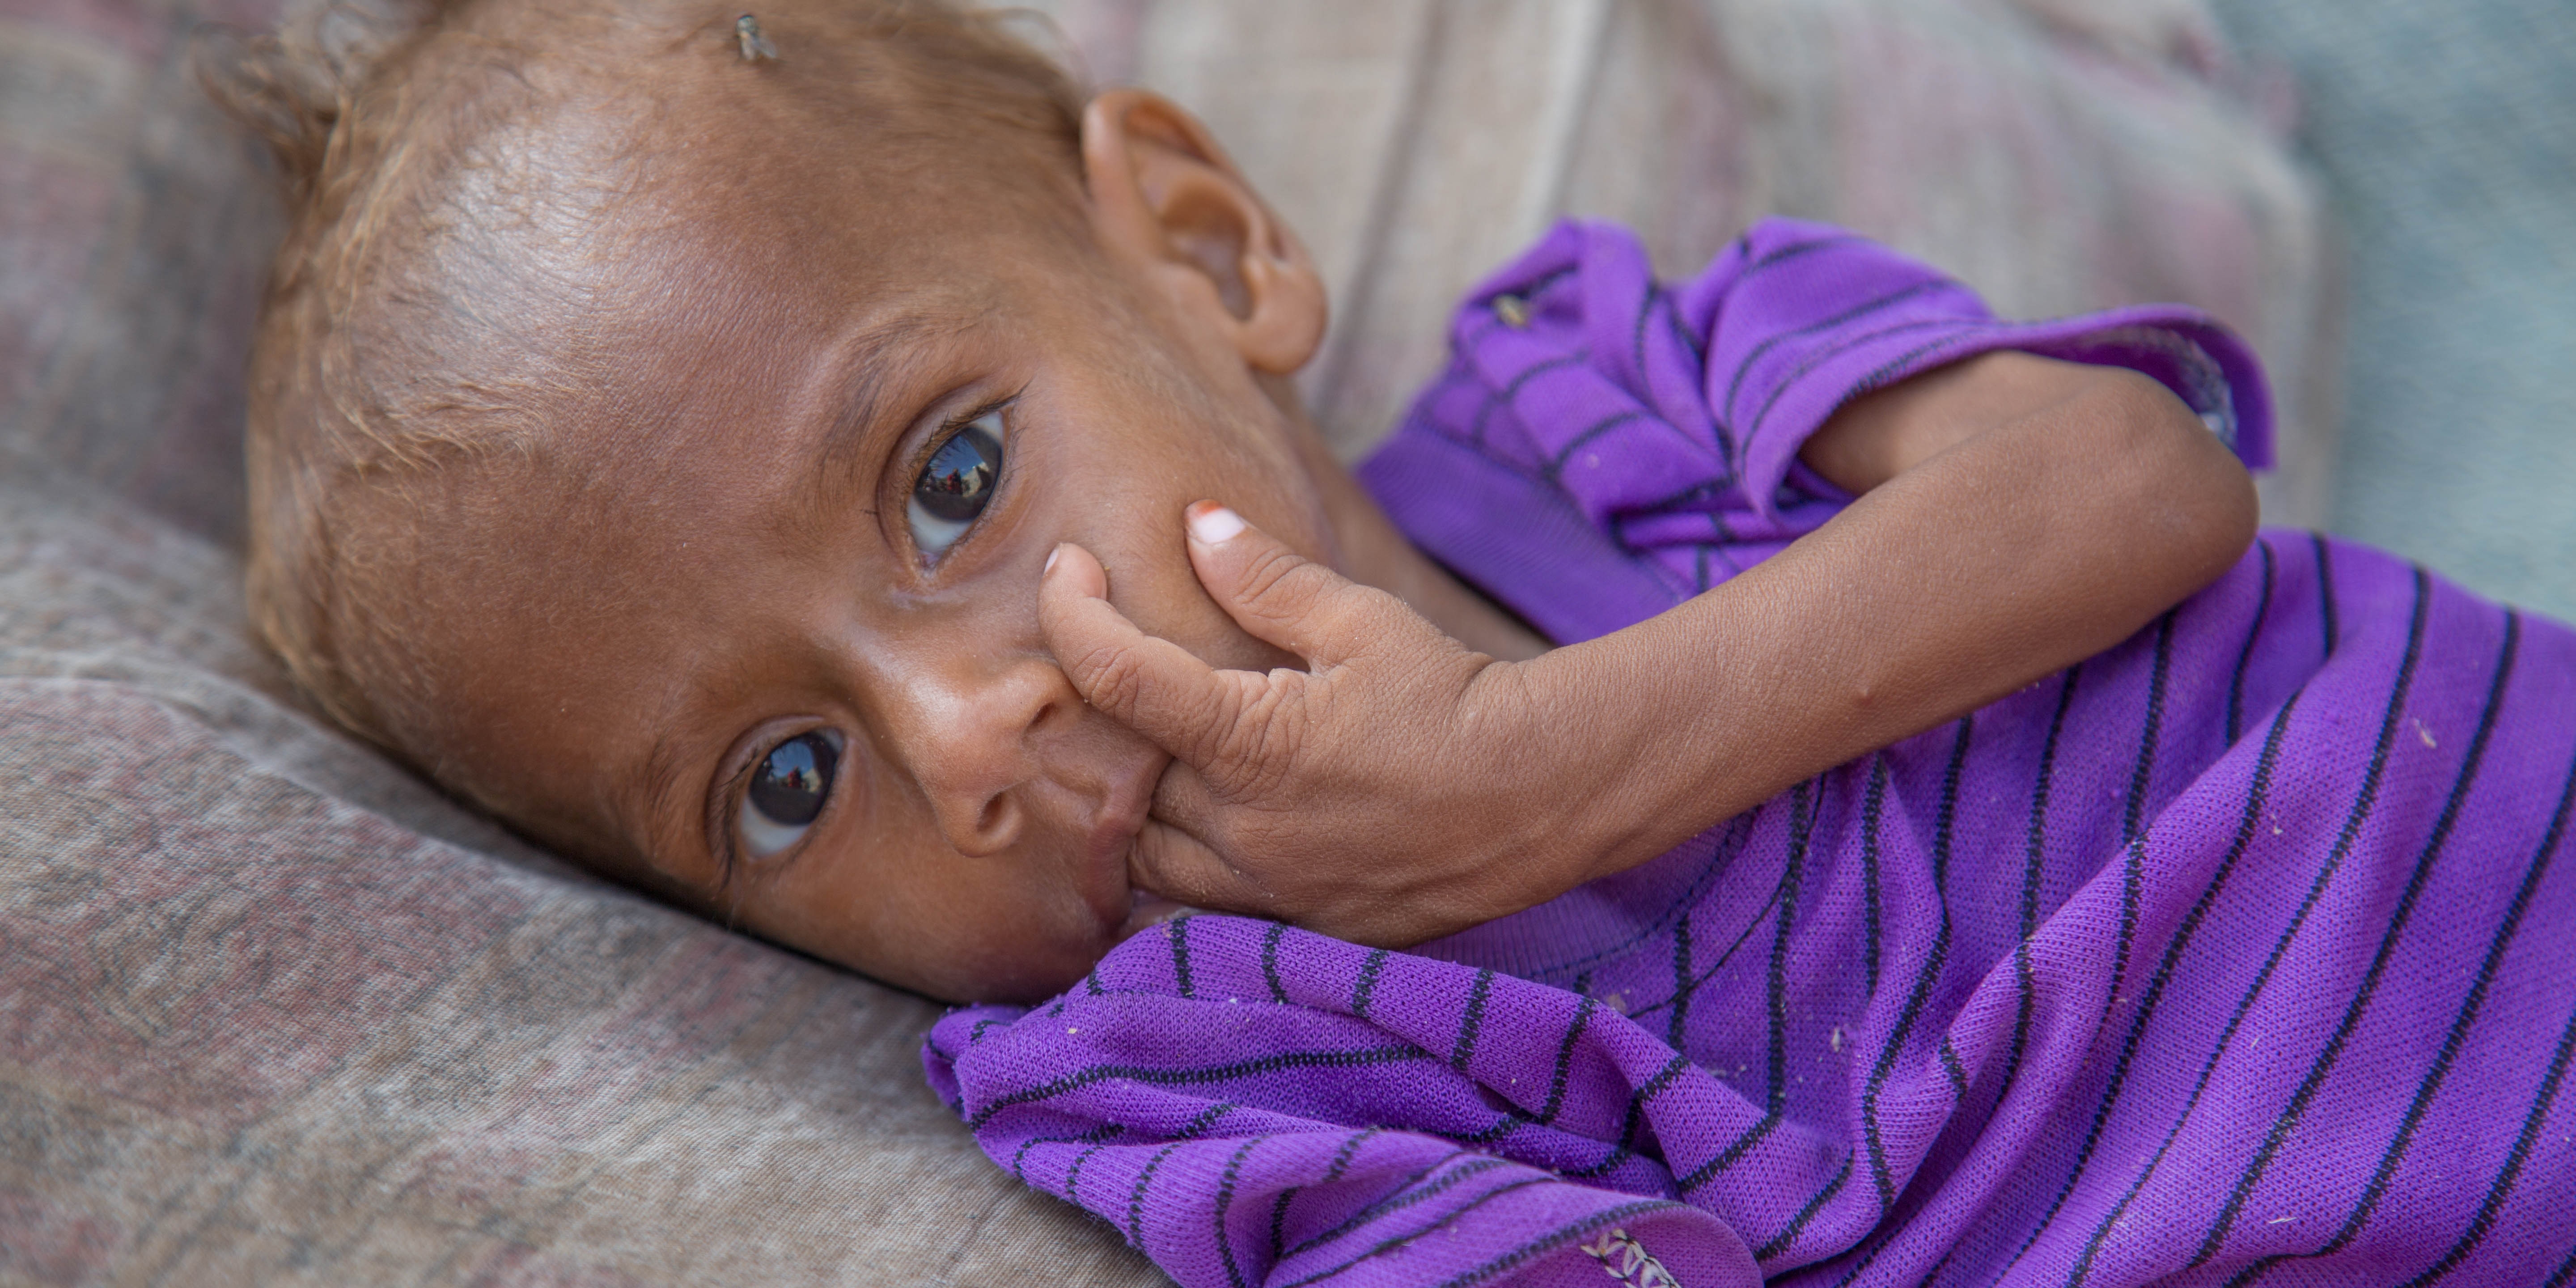 Nusair*, 13 months old, lies on a bed in his house in Hodeidah, Yemen. Severely malnourished, the baby boy was treated for malnutrition in a Save the Children supported clinic. Credit: Mohammed Awadh / Save the Children, Oct 2018